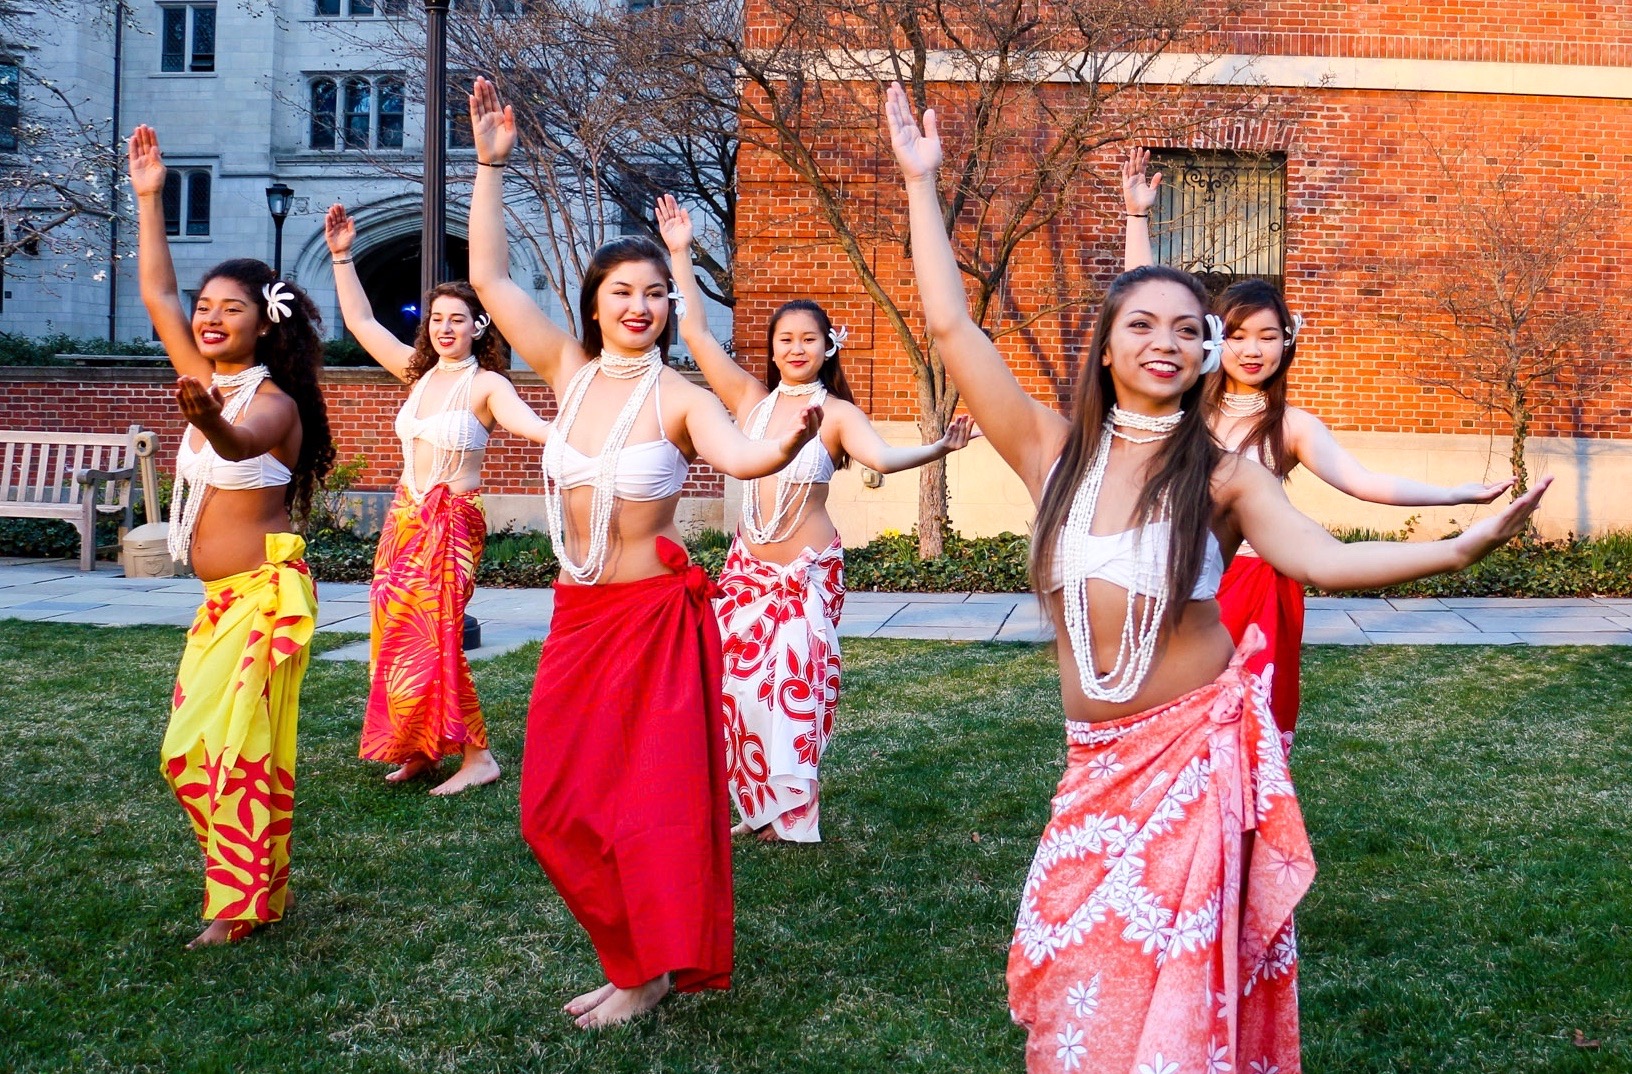 Melia Bernal (front right) performing with the Shaka student group in 2017.